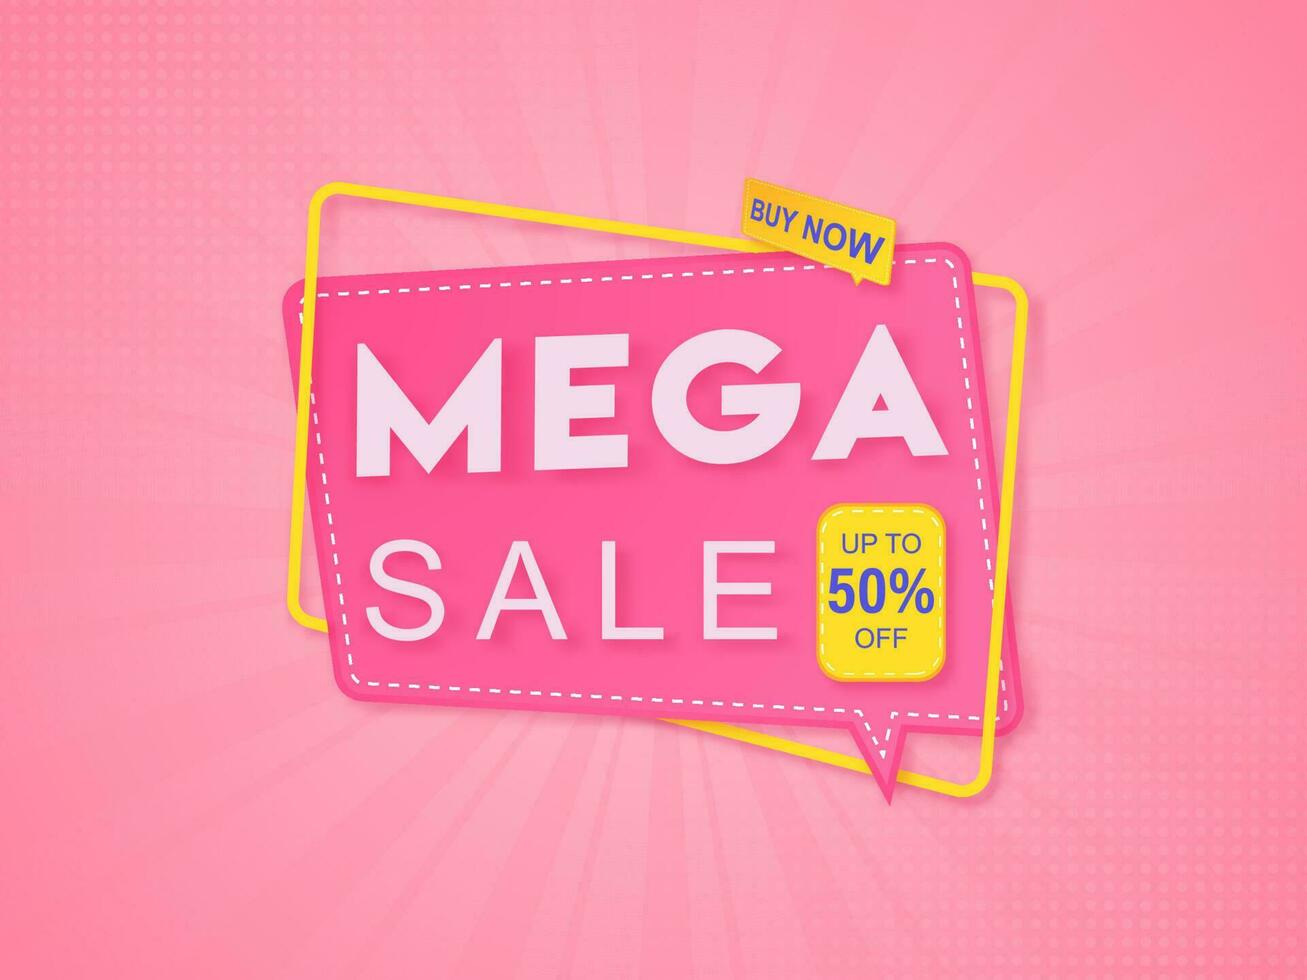 Up To 50 Discount Offer for Mega Sale Sticker or Label on Pink Rays Halftone Effect Background. vector